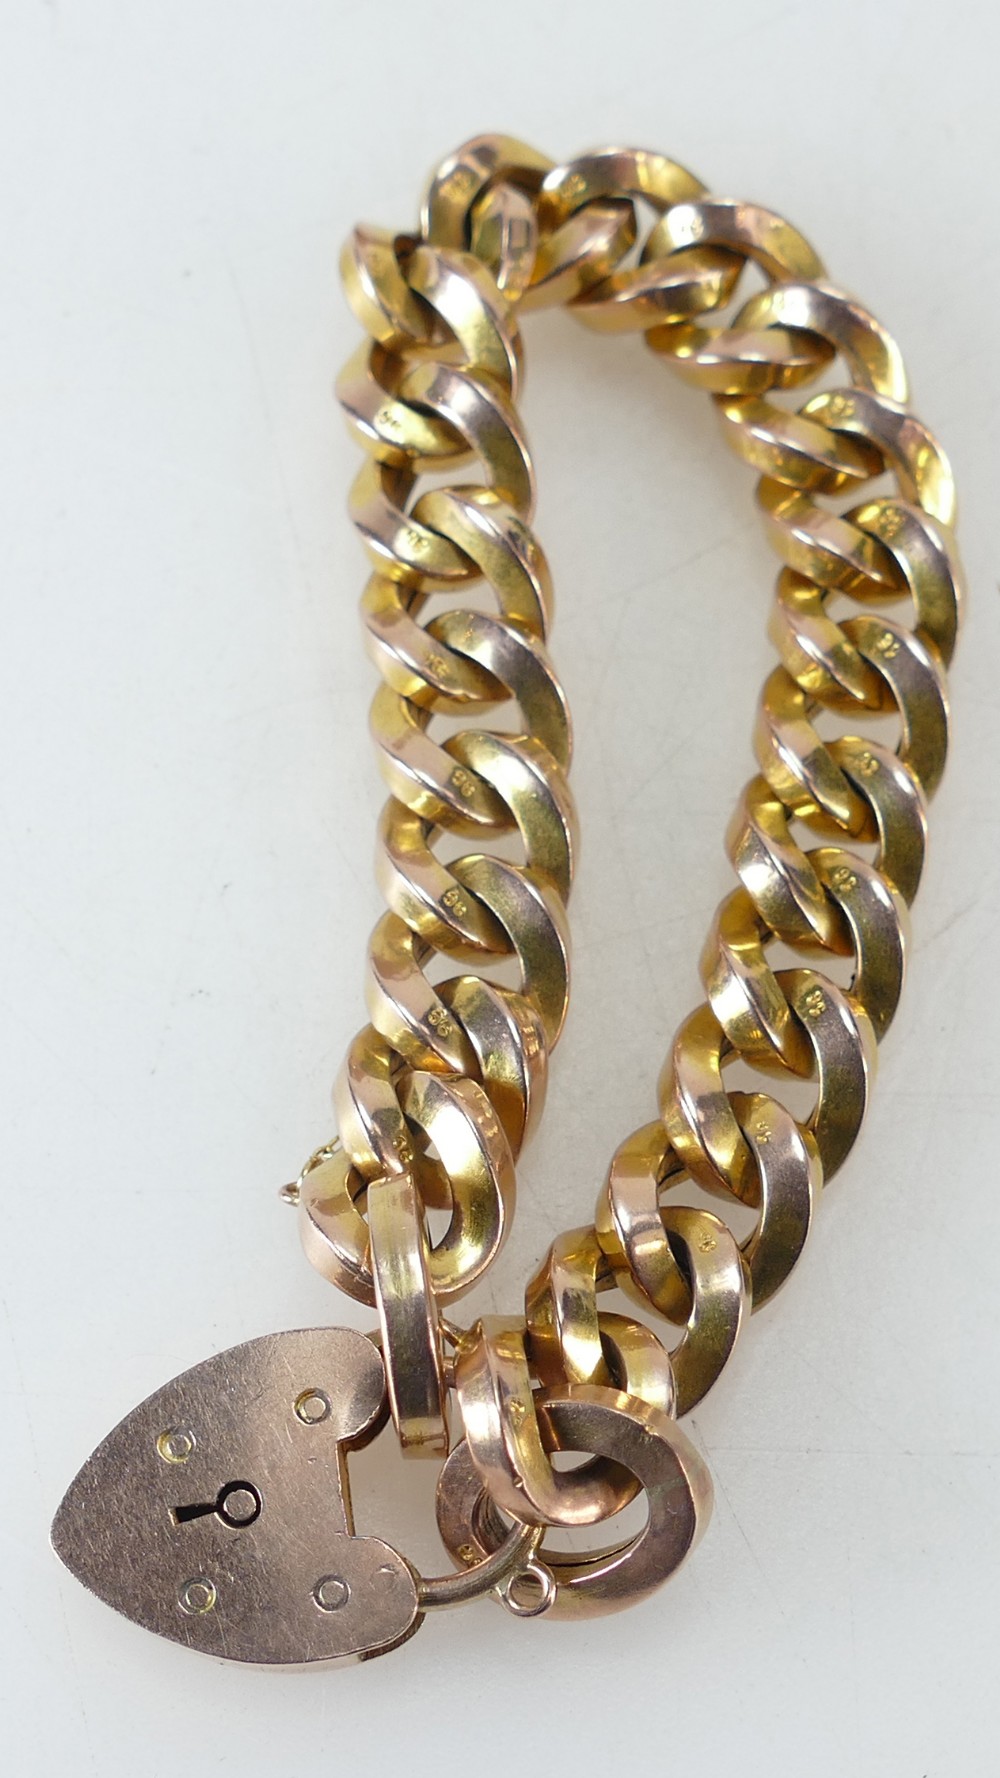 9ct gold bracelet - Early 20th century of hollow construction, 11mm square curb link, weight 27.1g.